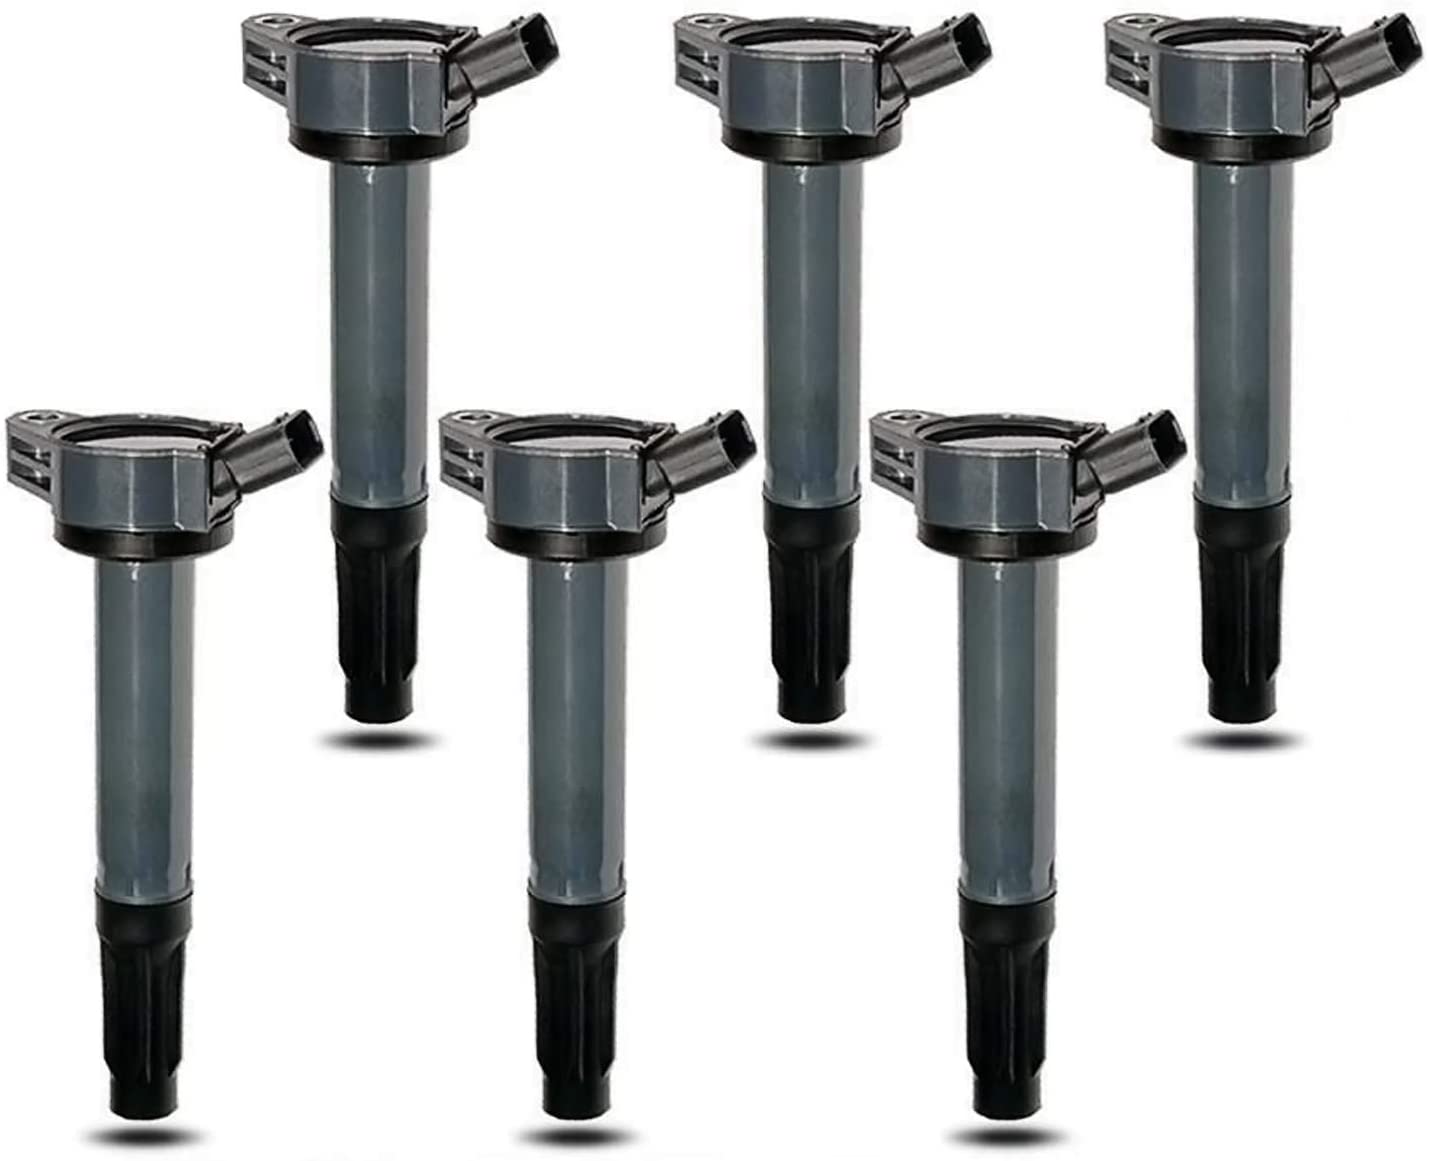 A-Premium Ignition Coils Pack Replacement for Avalon Camry Highlander RAV4 Sienna RX350 ES350 V6 3.5L 6-PC Set (Pack of 6)